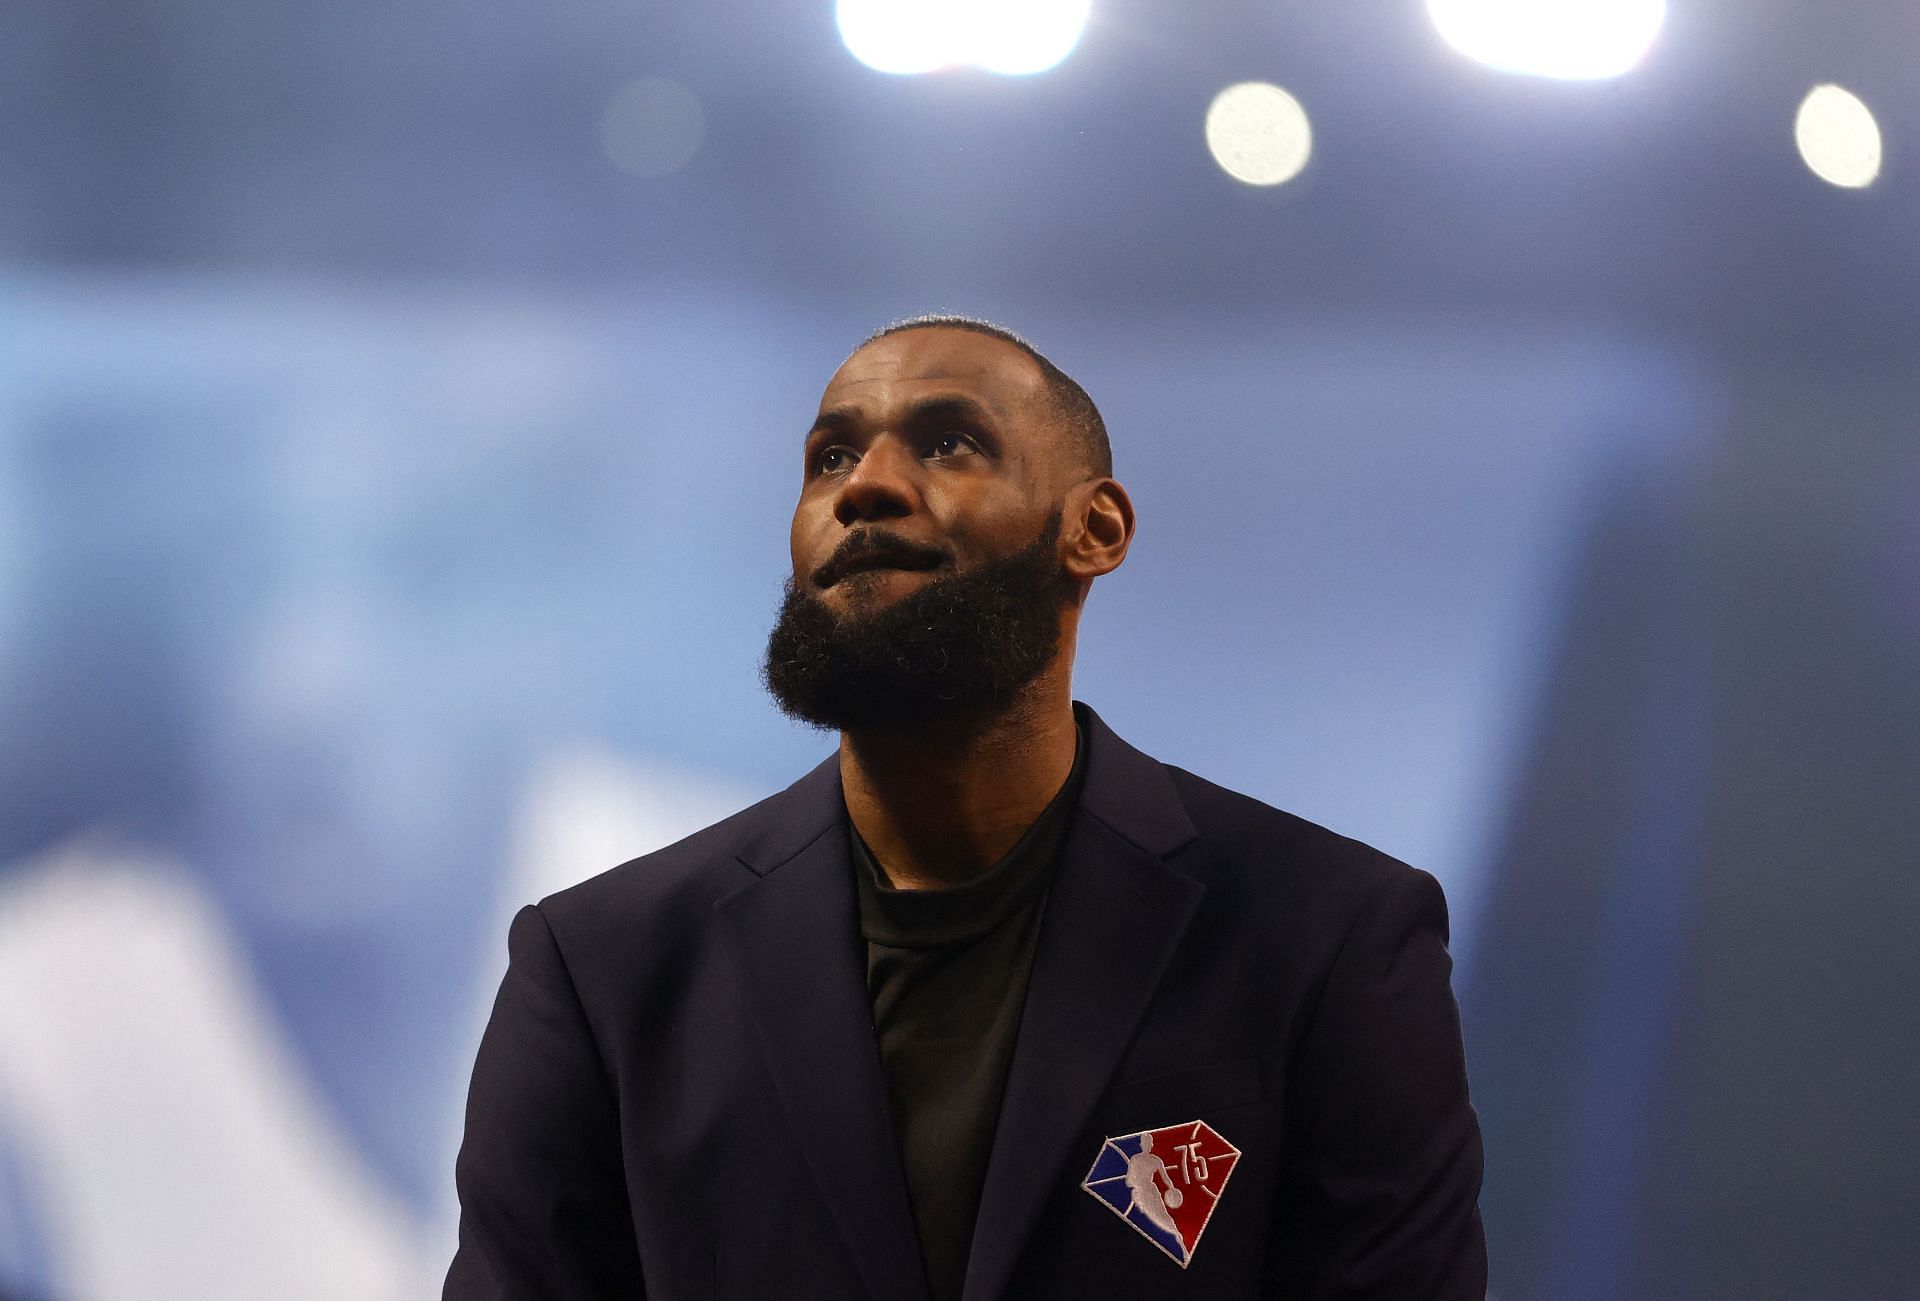 Los Angeles Lakers superstar LeBron James at the 2022 NBA All-Star game